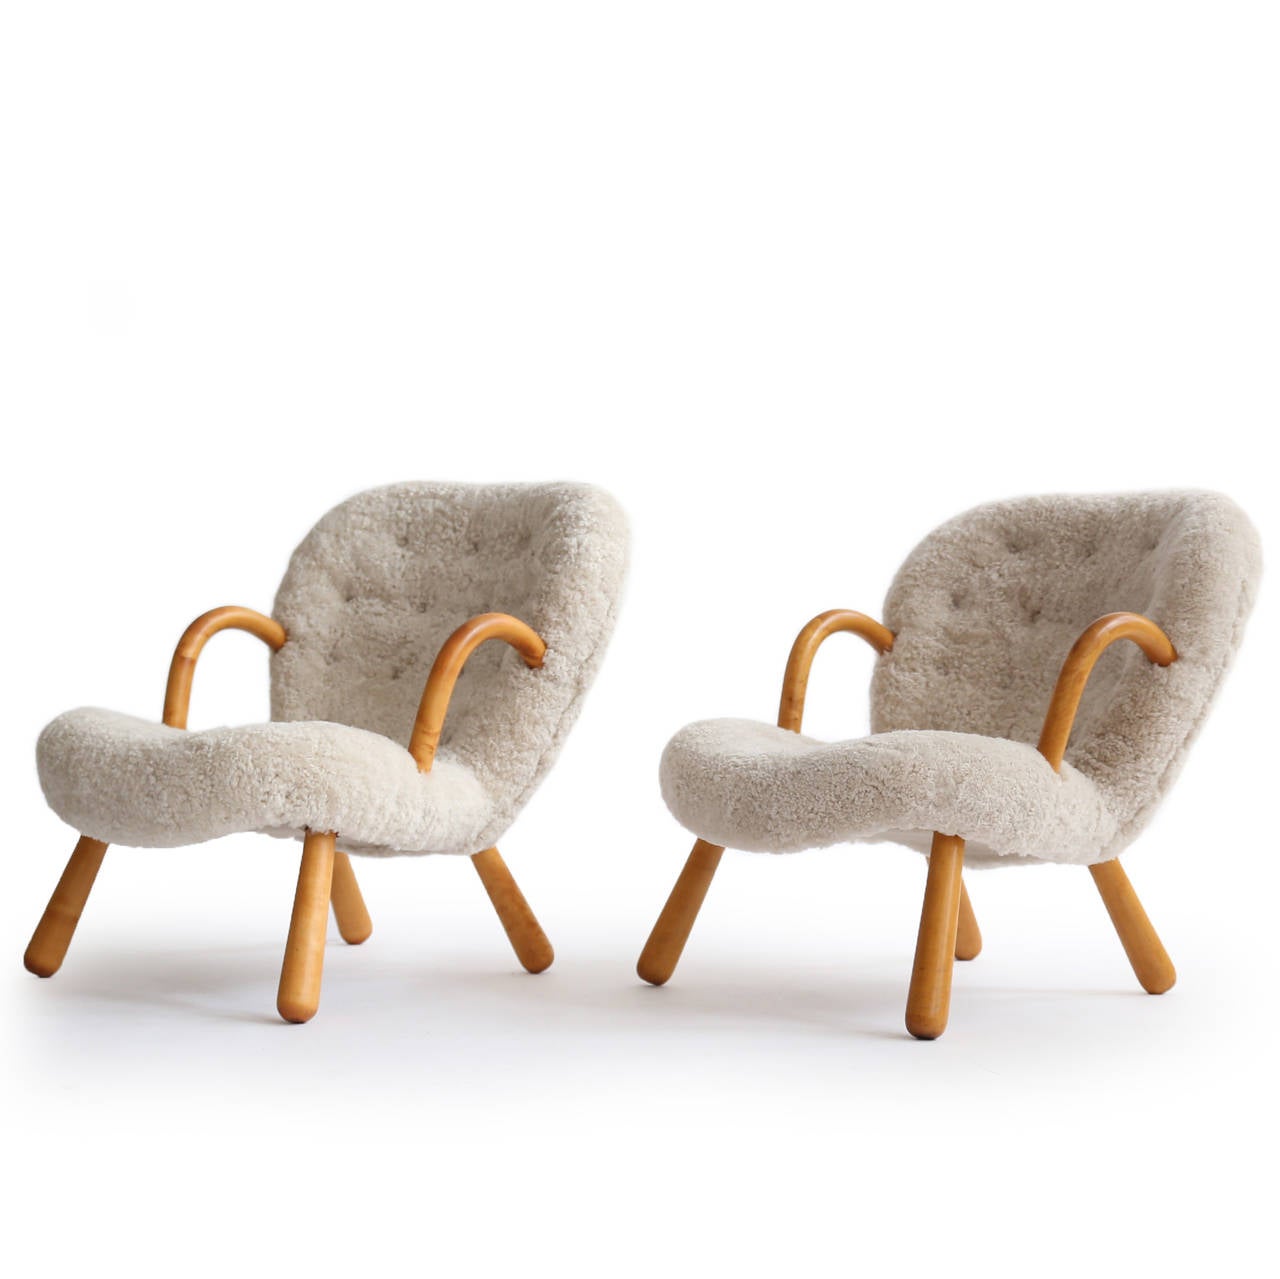 A pair of Philip Arctander clam chairs with legs of birch, upholstered with lamb skin fitted with buttons. 

Designed by Philip Arctander, Denmark 1944 and manufactured by Nordisk Stål & Møbel Central, Denmark.